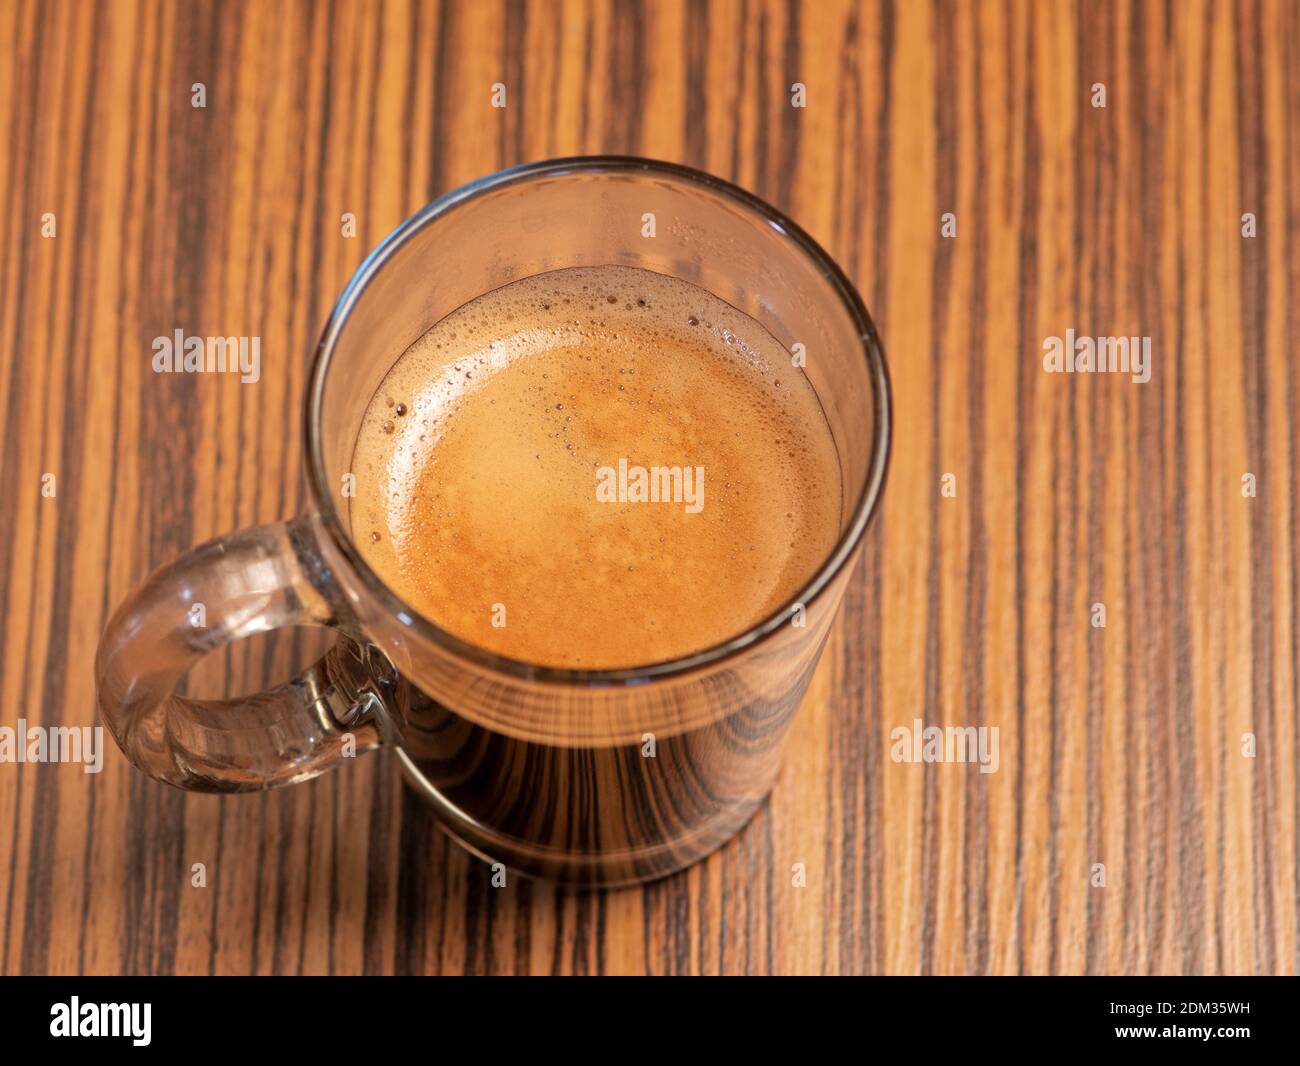 Cup of espresso isolated on wooden background Stock Photo